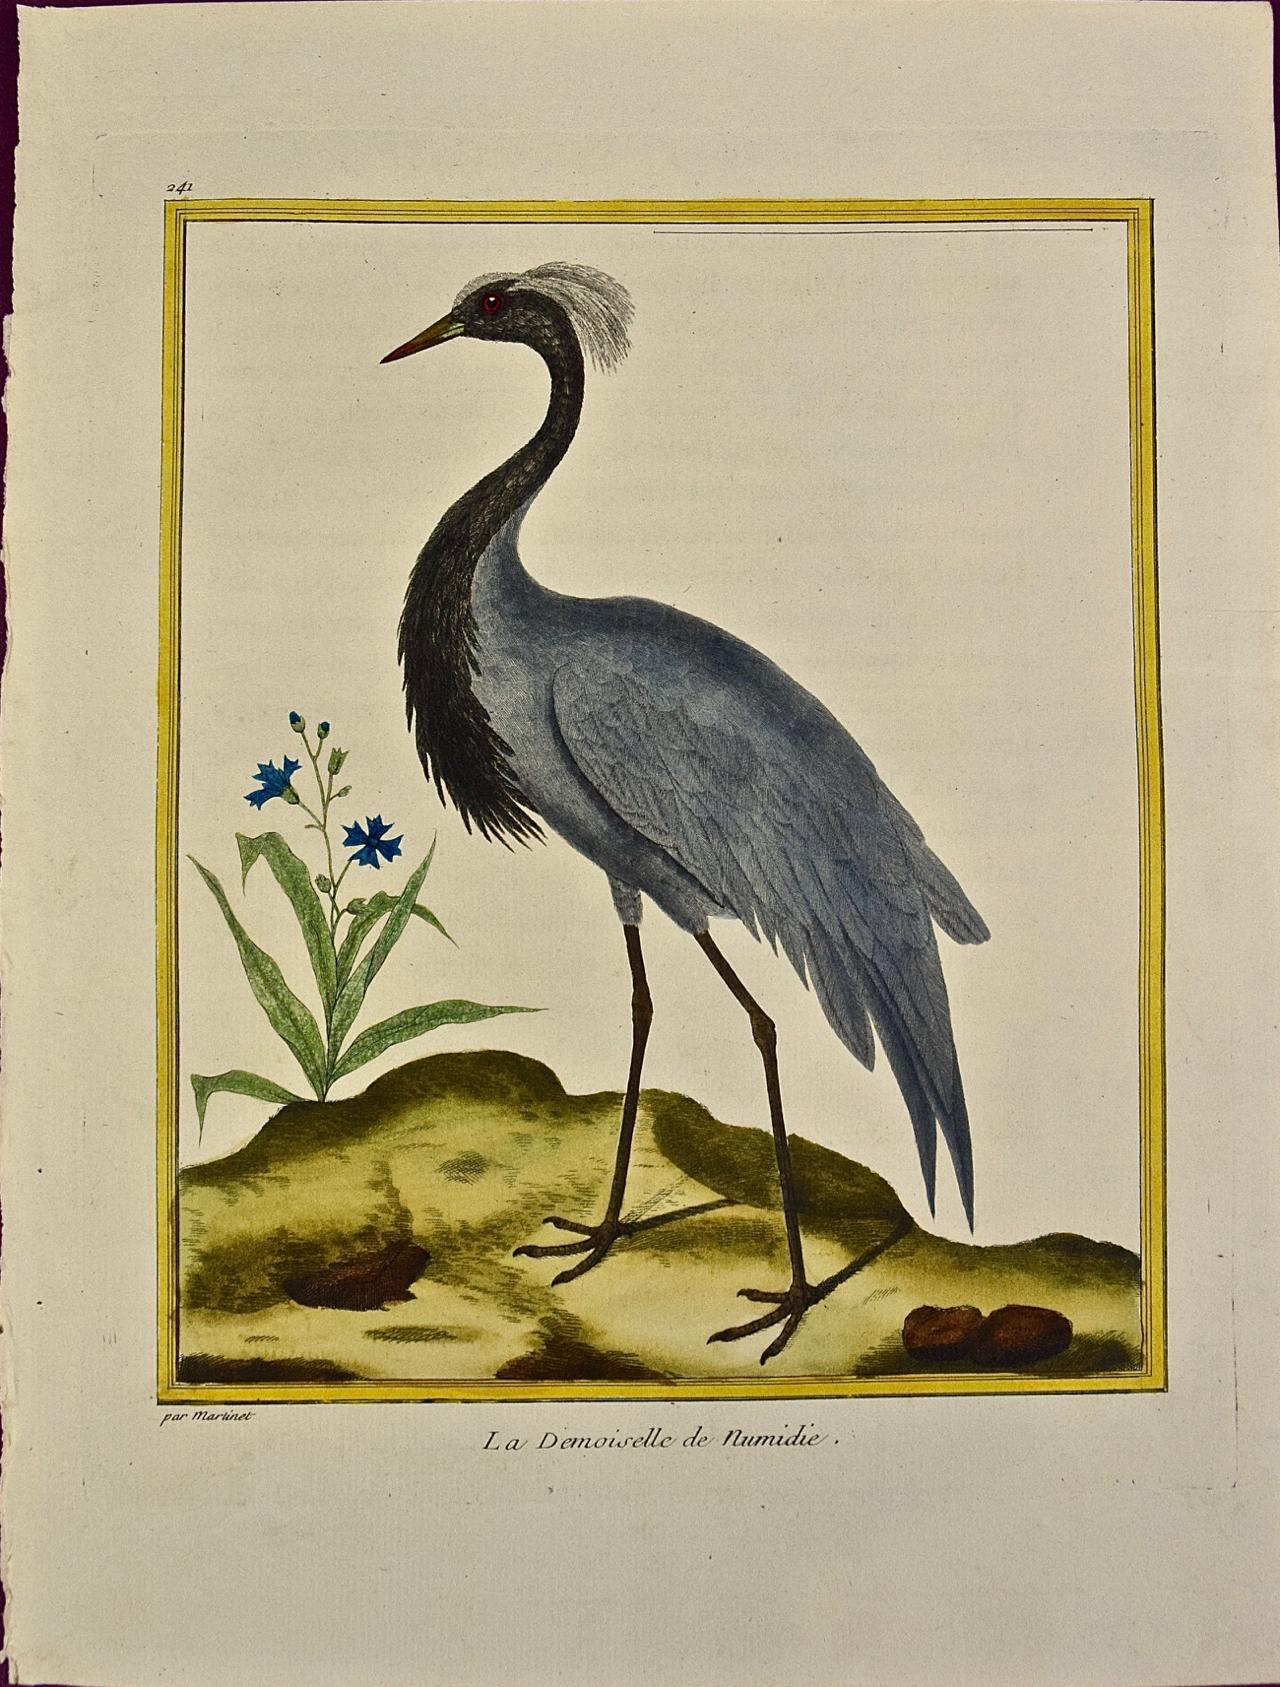 Francois Nicolas Martinet Animal Print - An 18th Century Hand Colored Engraving of a Crane "La Demoiselle" by Martinet 